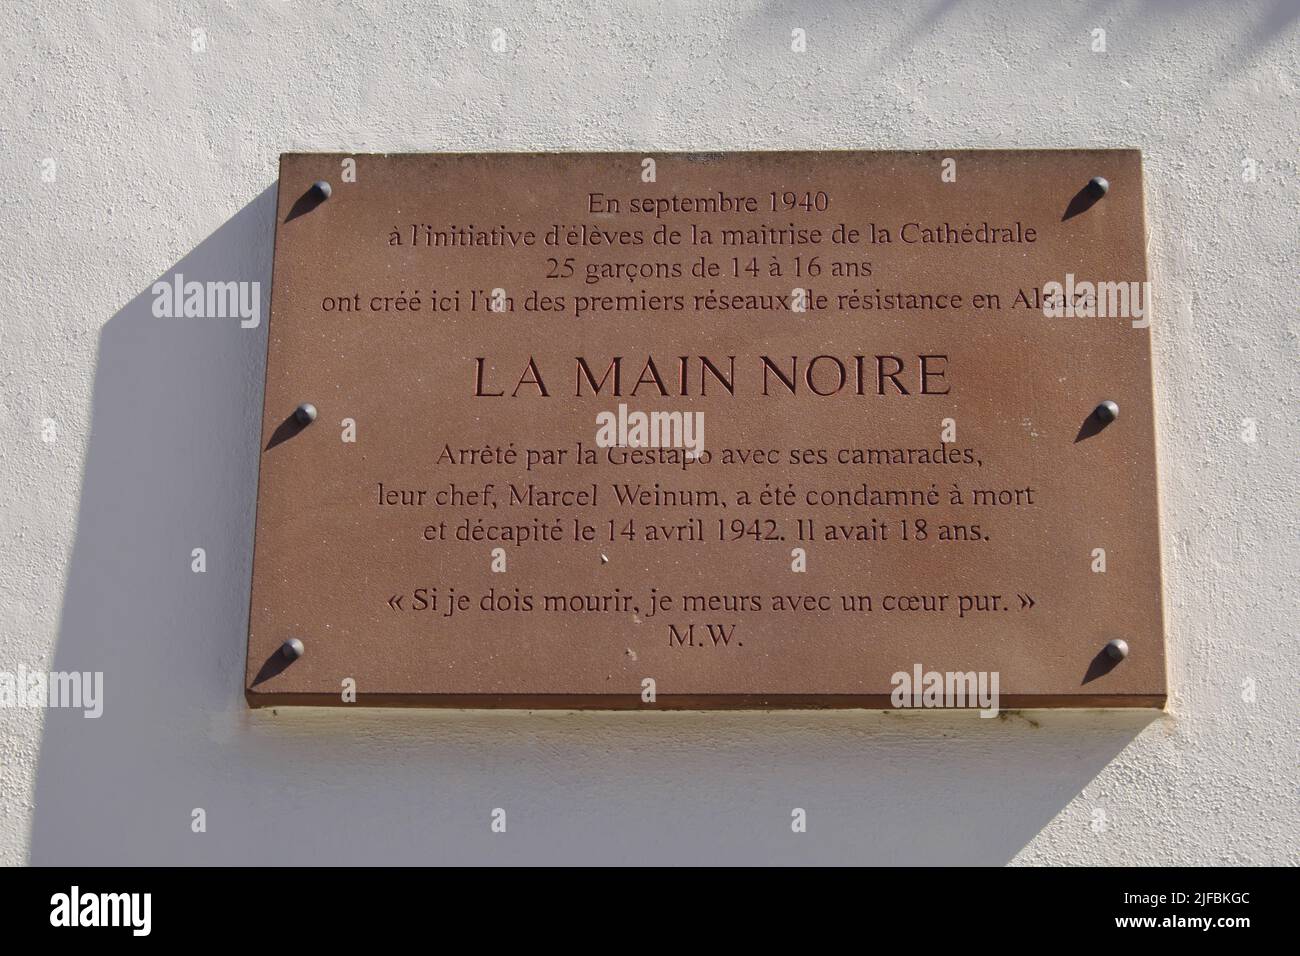 France, Bas Rhin, Strasbourg, old town listed as World Heritage by UNESCO, Place Saint Etienne, Episcopal College Saint Étienne, plaque in tribute to the Main Noire group, a group of young Alsatian resistance fighters Stock Photo